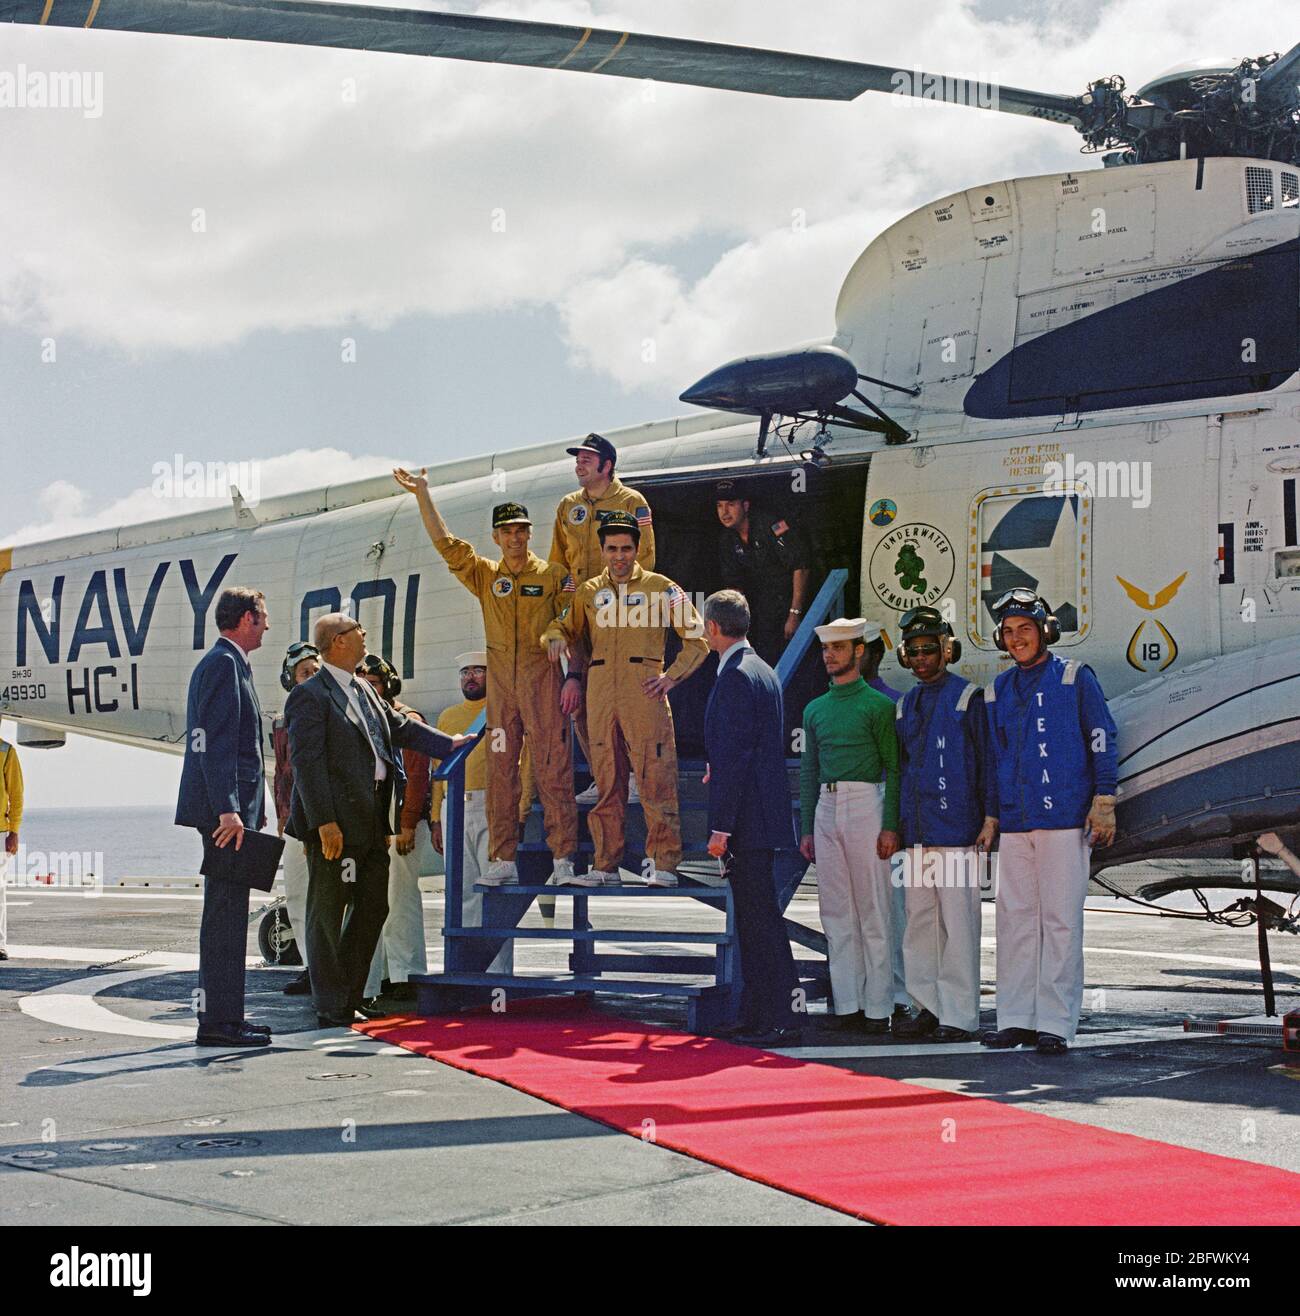 (19 Dec. 1972) --- The three Apollo 17 crewmembers arrive aboard the prime recovery ship, the USS Ticonderoga, to successfully conclude the final lunar landing mission in NASA's Apollo program. They are astronauts Eugene A. Cernan (waving), Harrison H. Schmitt (on Cernan's left), and Ronald E. Evans (standing in back). Stock Photo